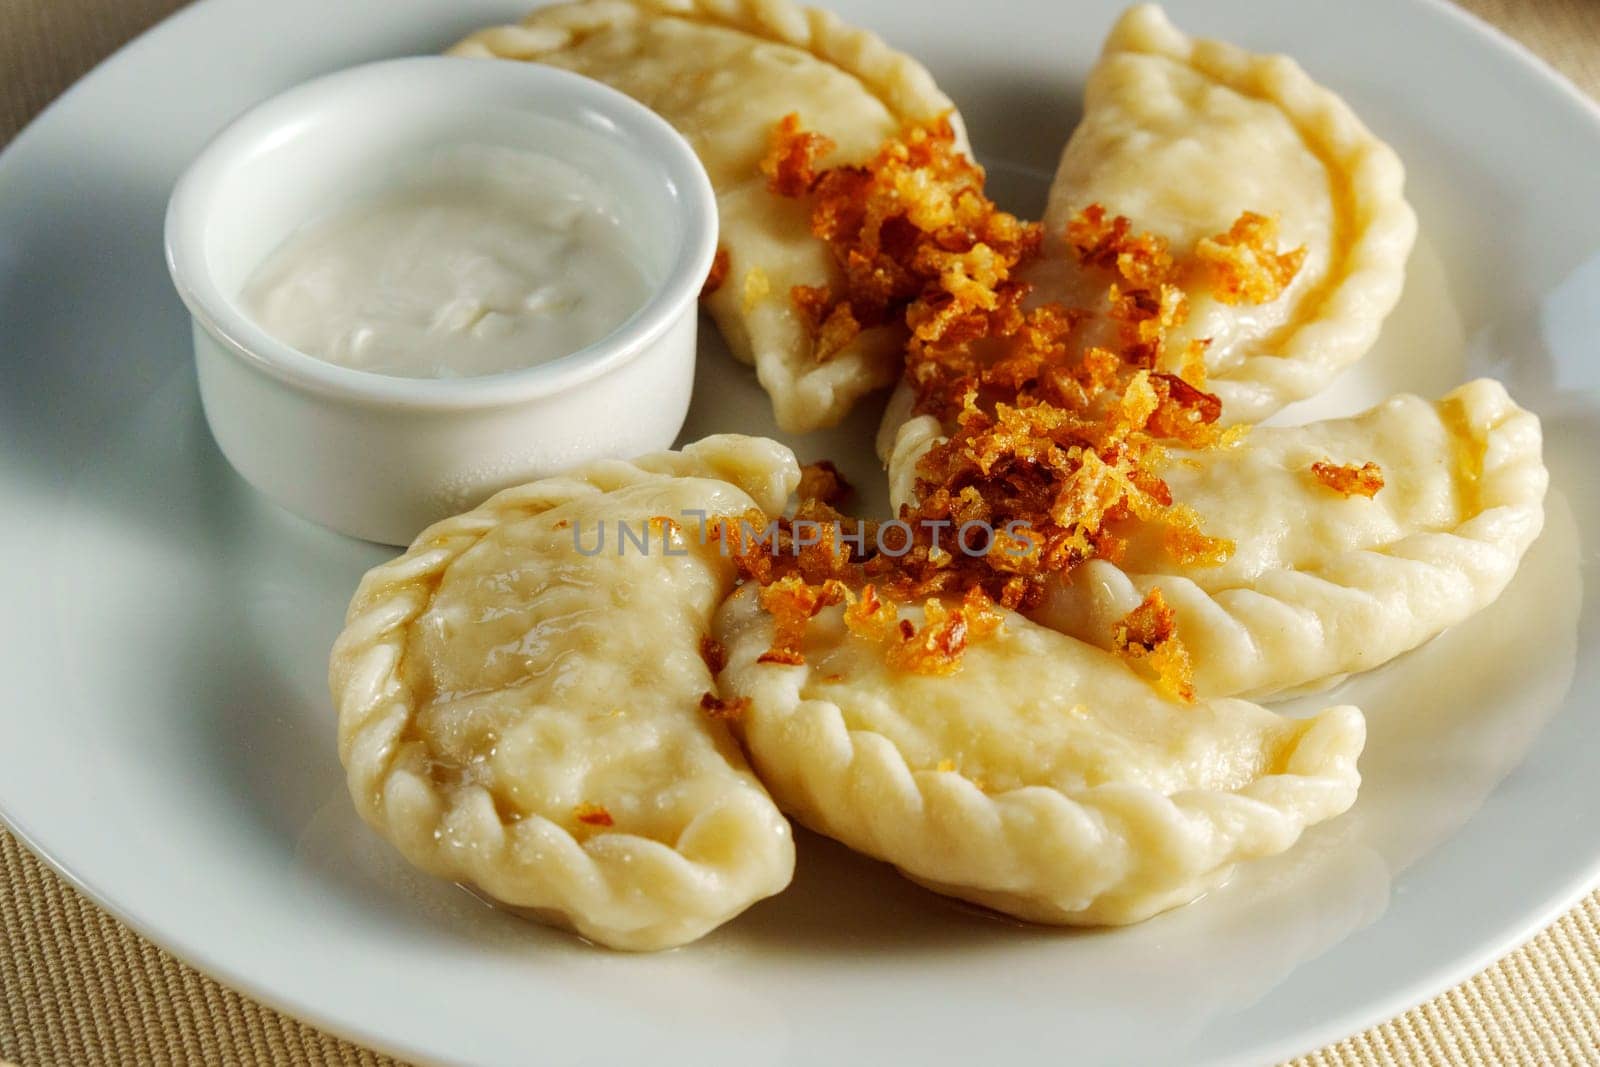 Delicate Pleasures: A Luxurious Feast of Dumplings and Exquisite Dip by darksoul72